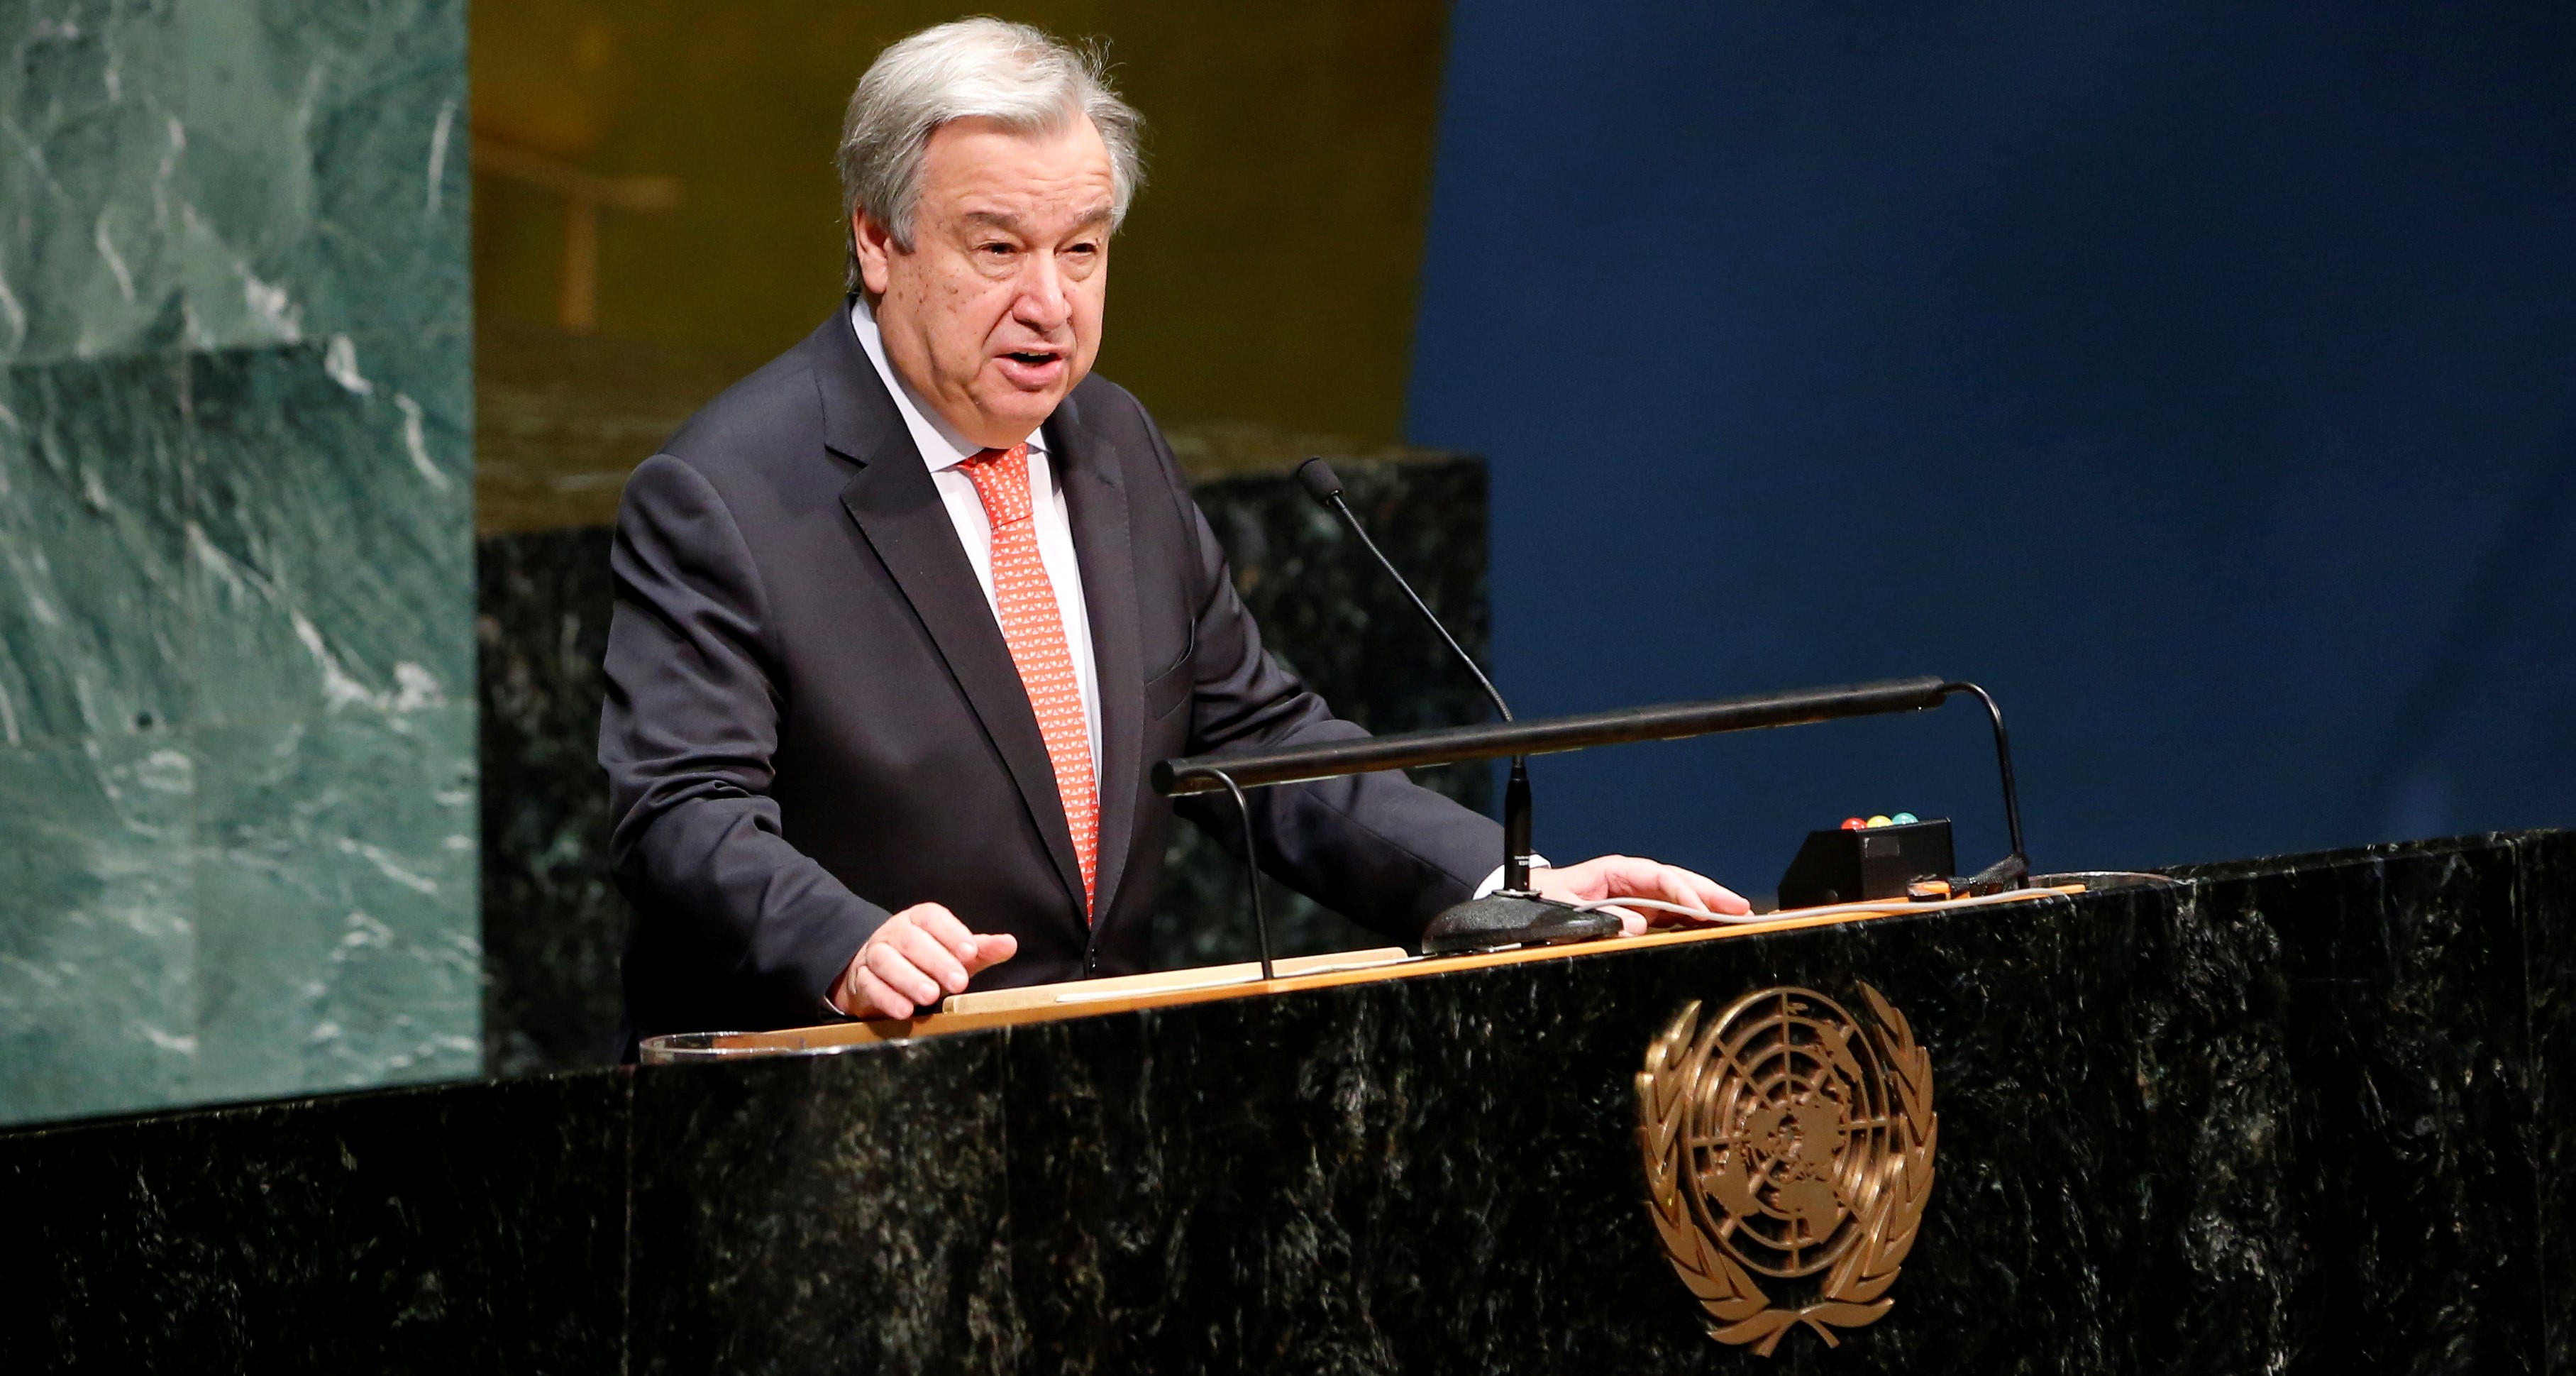 Good offices available to India, Pakistan, if both ask for it: UN chief on Kashmir issue